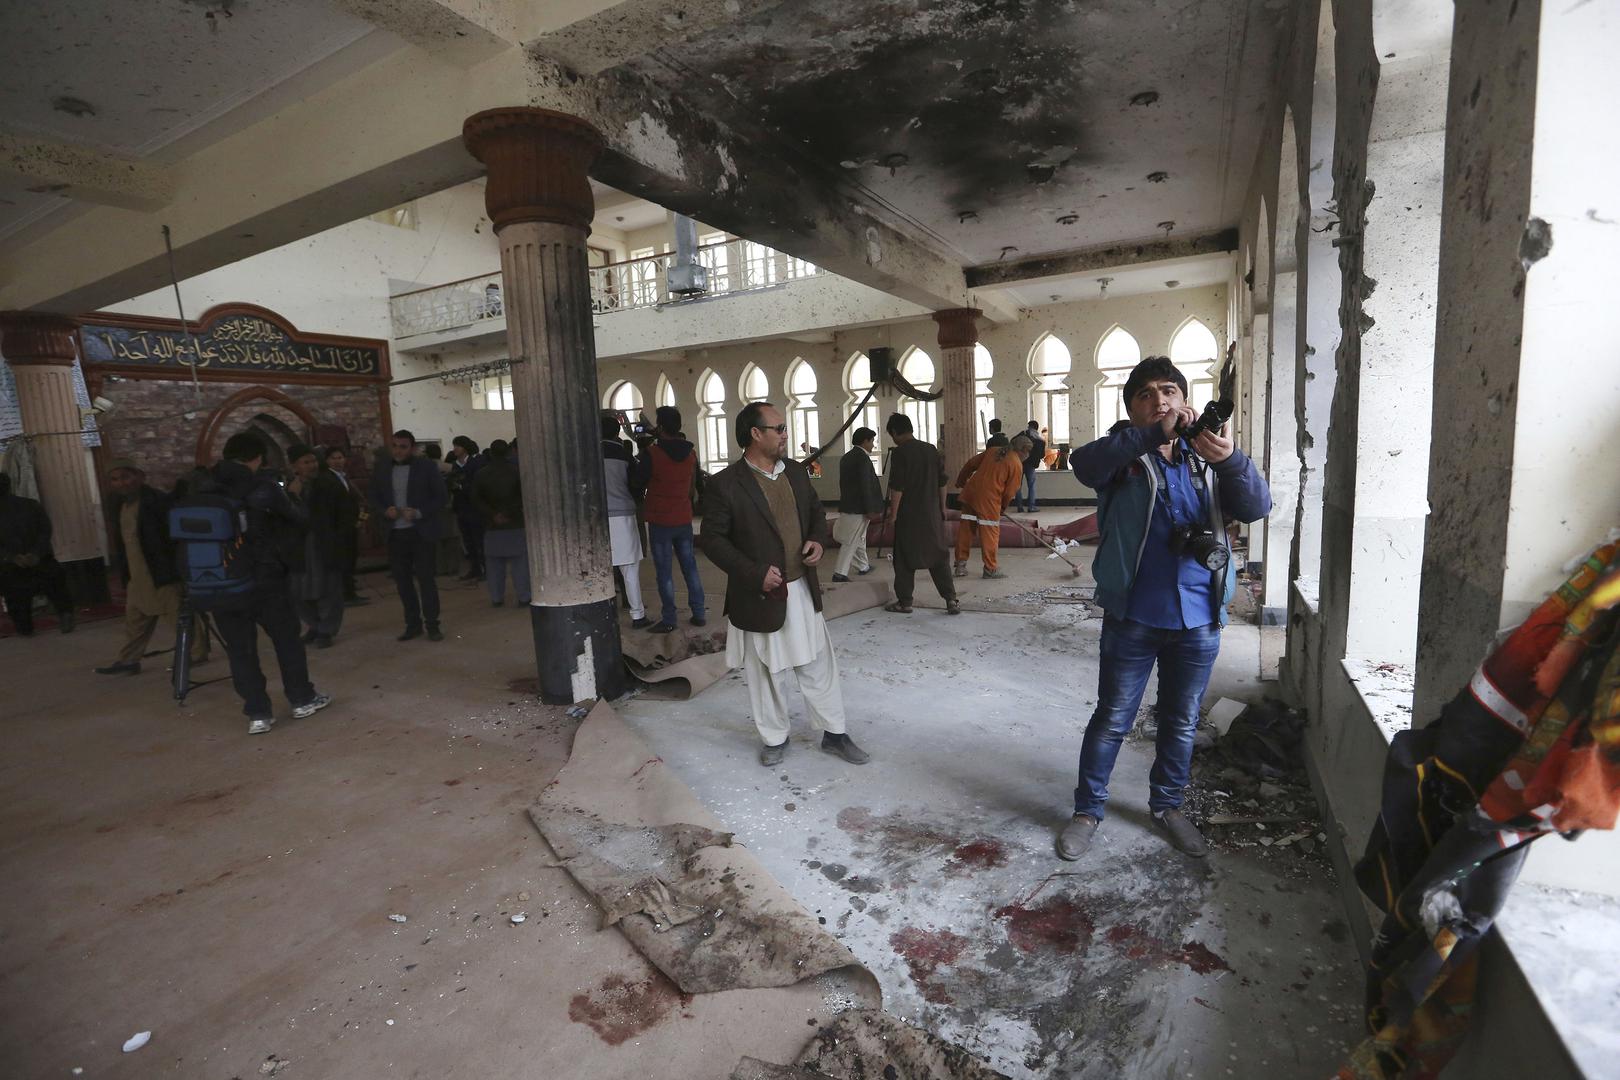 The Baqir-ul Ulum Mosque in Kabul after a suicide attack, November 21, 2016.